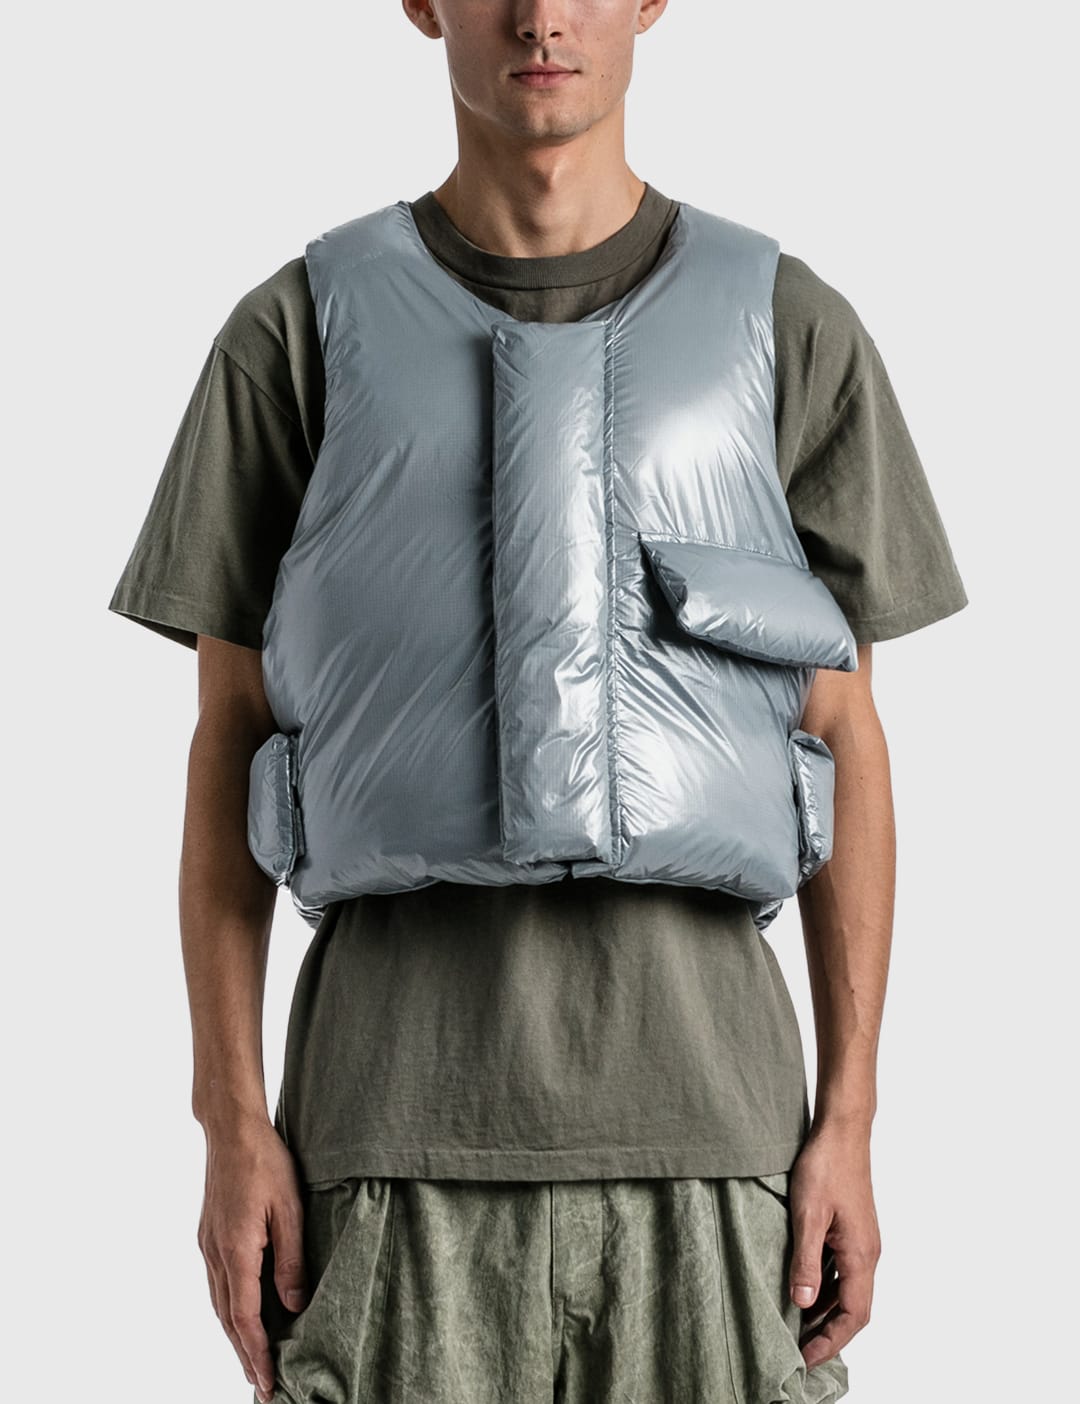 Entire Studios - PILLOW VEST | HBX - Globally Curated Fashion and